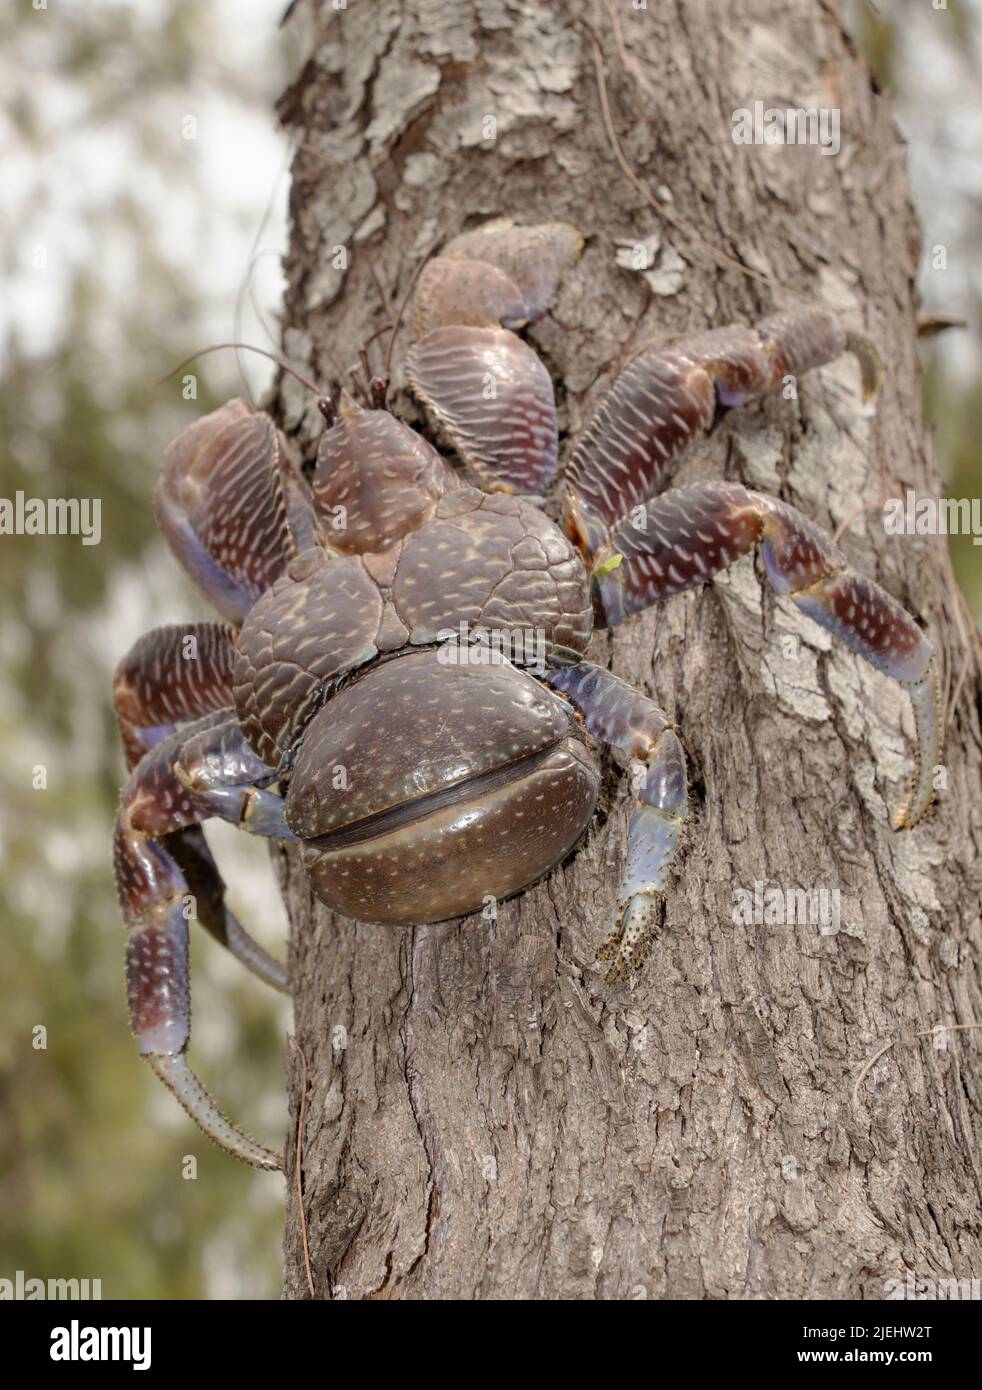 The Coconut or Robber Crab is found through-out the Indian Ocean and Western Pacific. Largest of the Hermit Crab family they have been over exploited Stock Photo